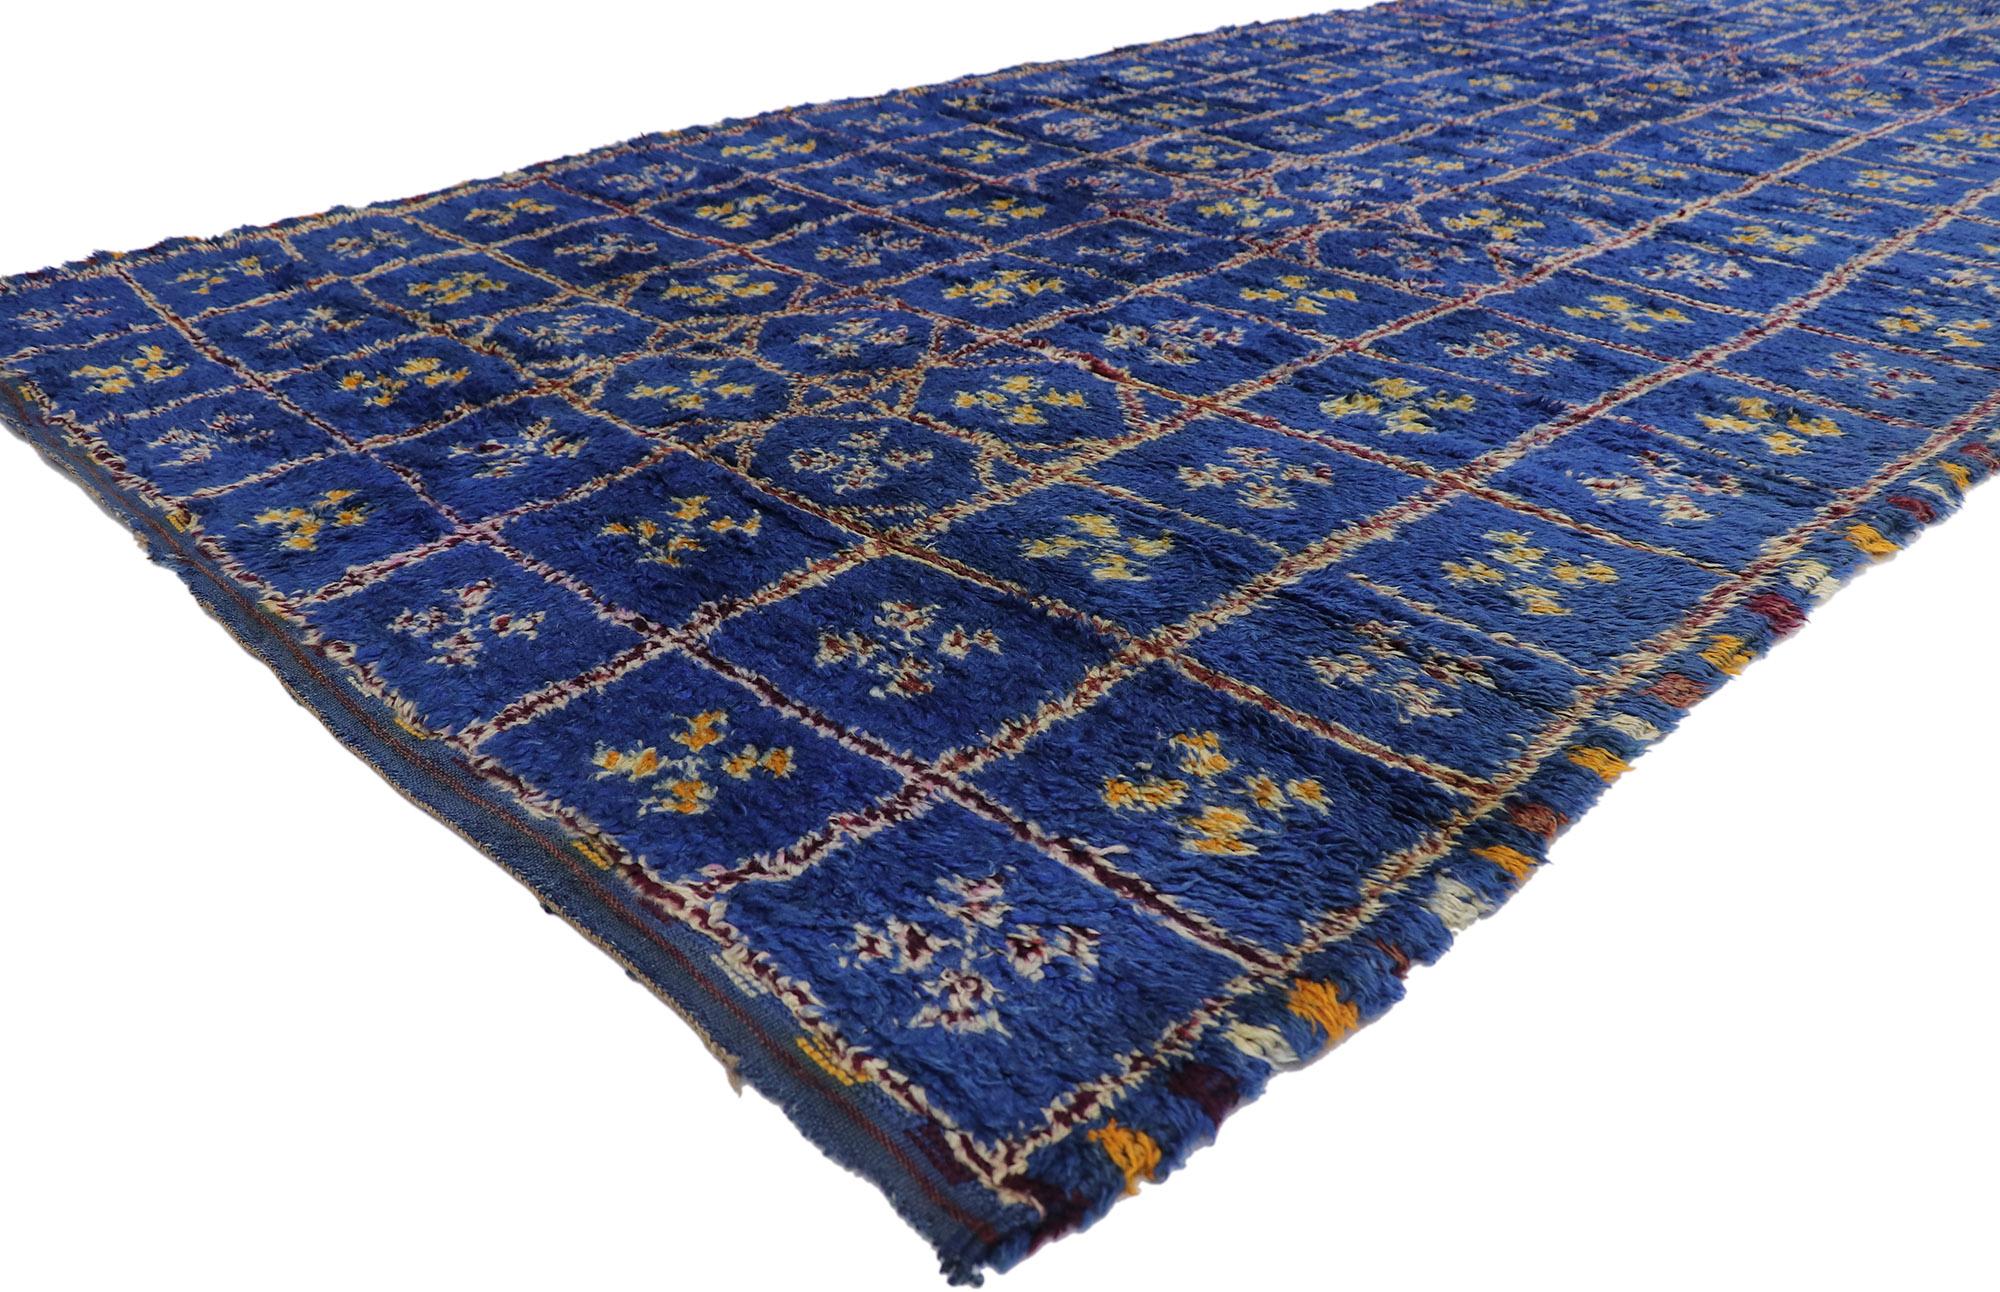 21217 vintage Berber Blue Beni M'Guild Moroccan rug with Tribal style 06'02 x 13'09. Showcasing a bold expressive design, incredible detail and texture, this hand knotted wool vintage Berber blue Beni M'Guild Moroccan rug is a captivating vision of